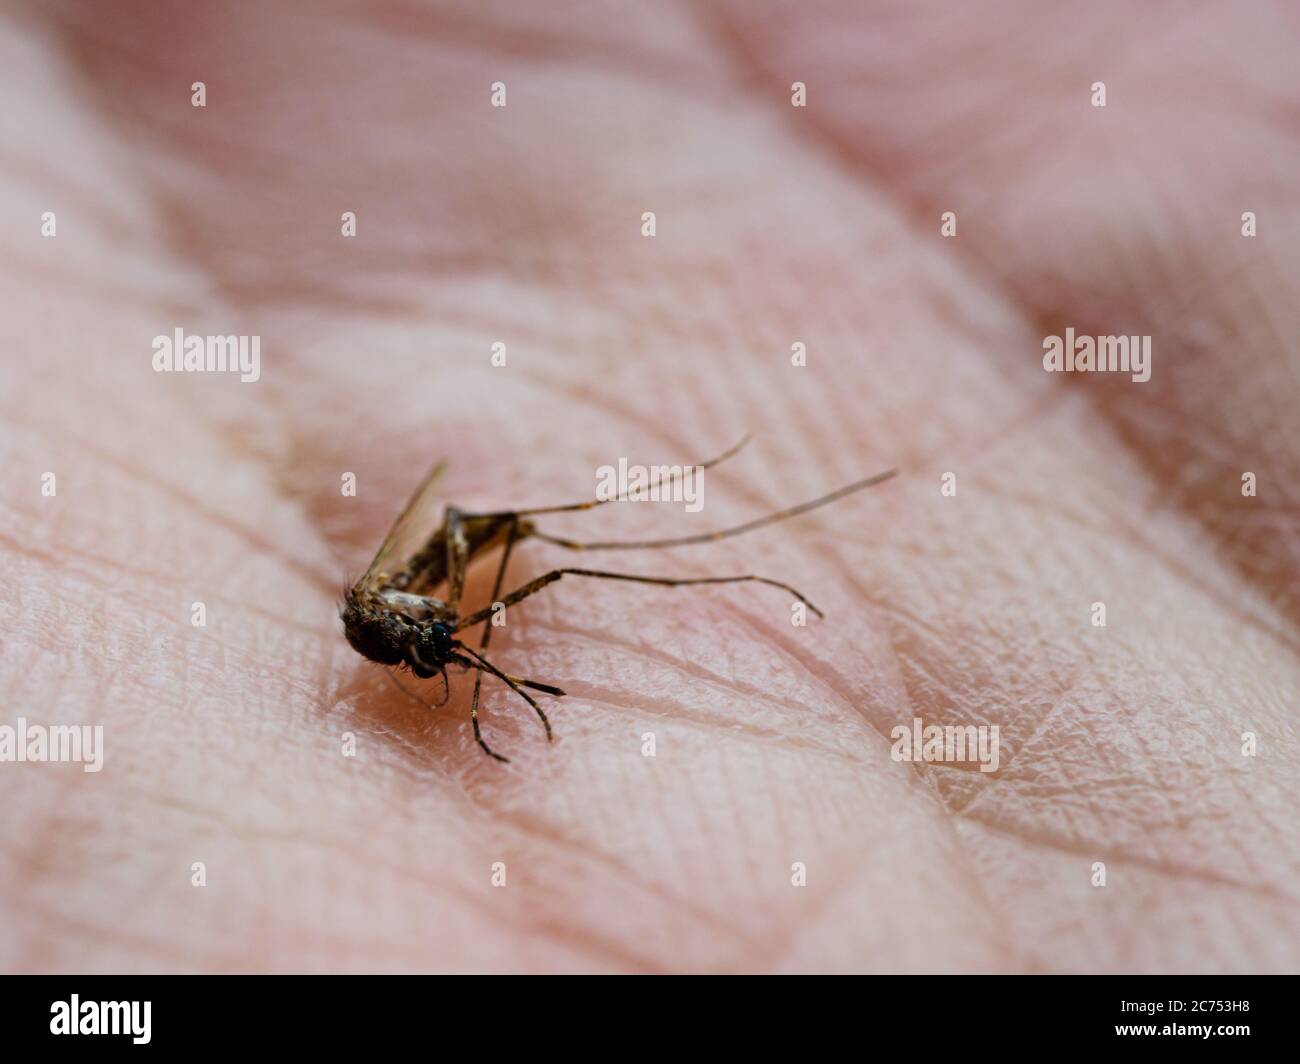 Macro close-up of a dead mosquito lying belly-up on the palm of a human hand Stock Photo